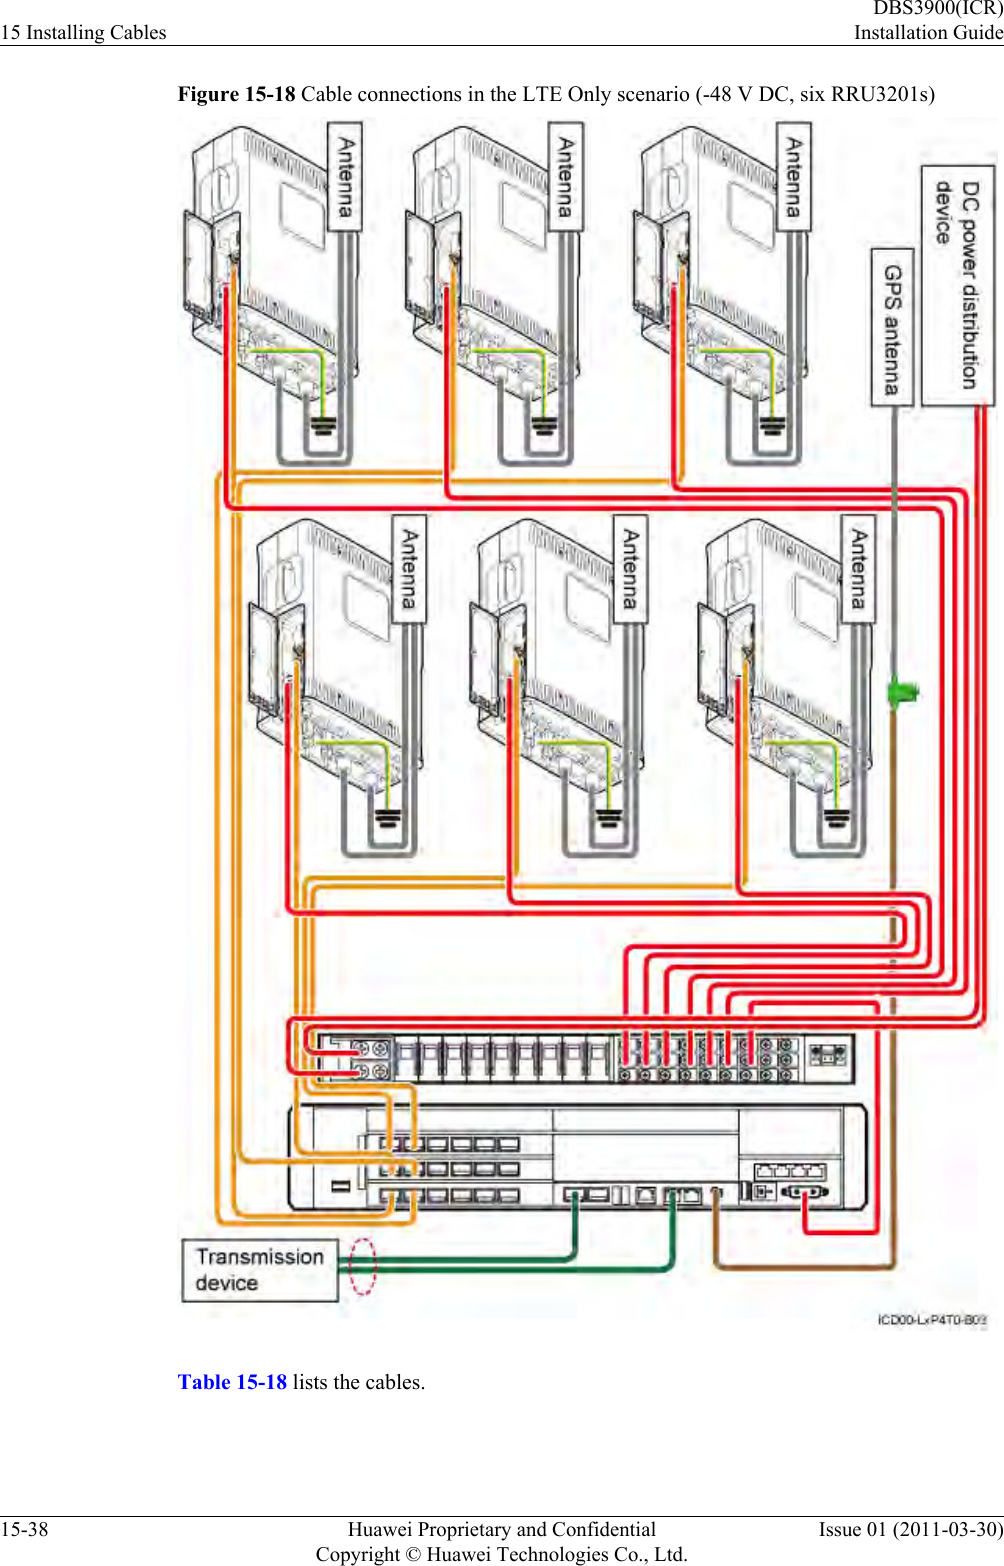 Figure 15-18 Cable connections in the LTE Only scenario (-48 V DC, six RRU3201s)Table 15-18 lists the cables.15 Installing CablesDBS3900(ICR)Installation Guide15-38 Huawei Proprietary and ConfidentialCopyright © Huawei Technologies Co., Ltd.Issue 01 (2011-03-30)